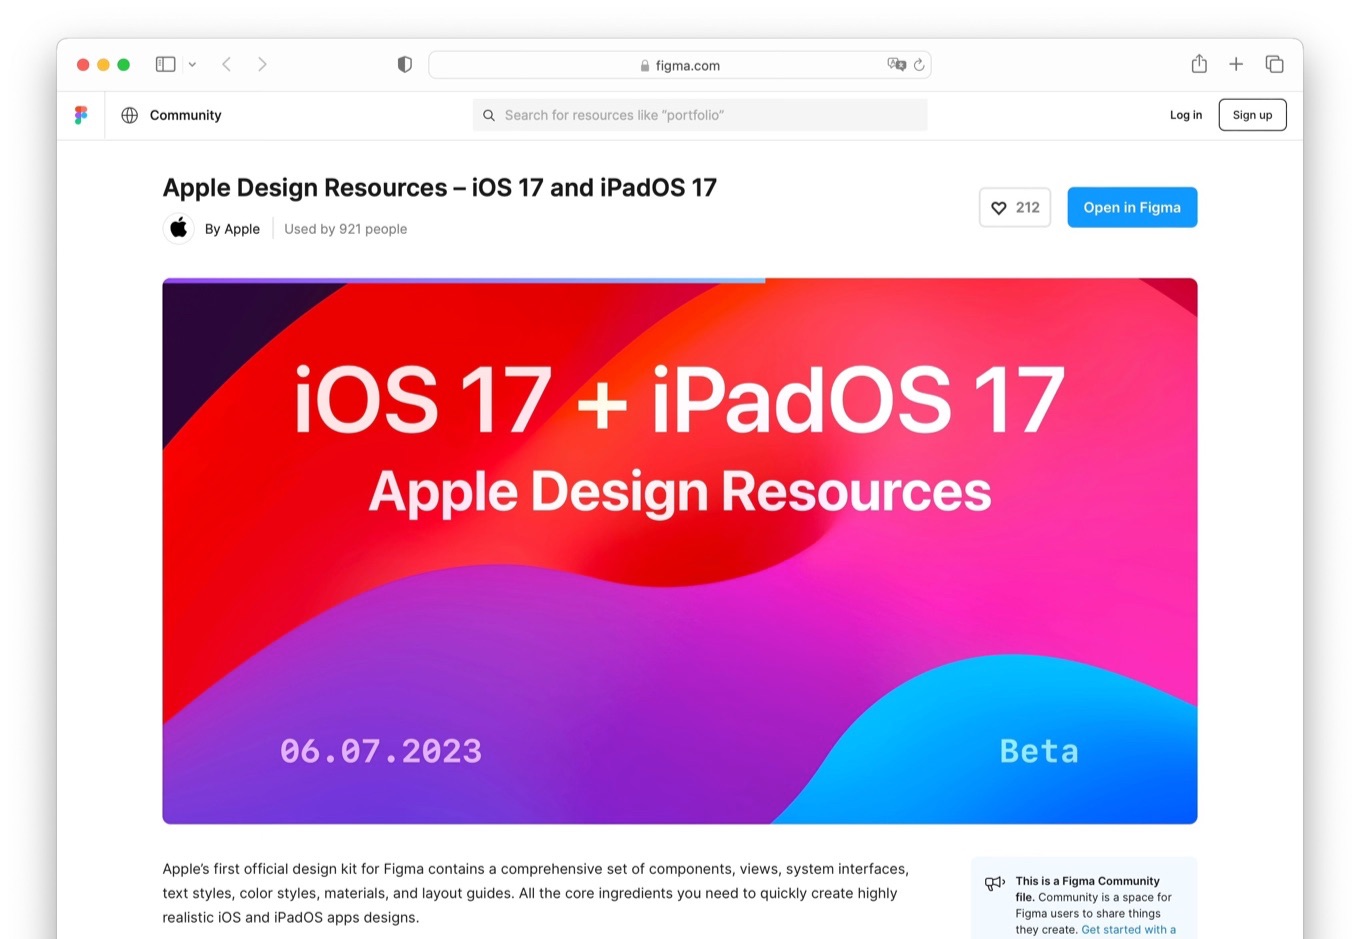 Apple Design Resources design kit for Figma now available